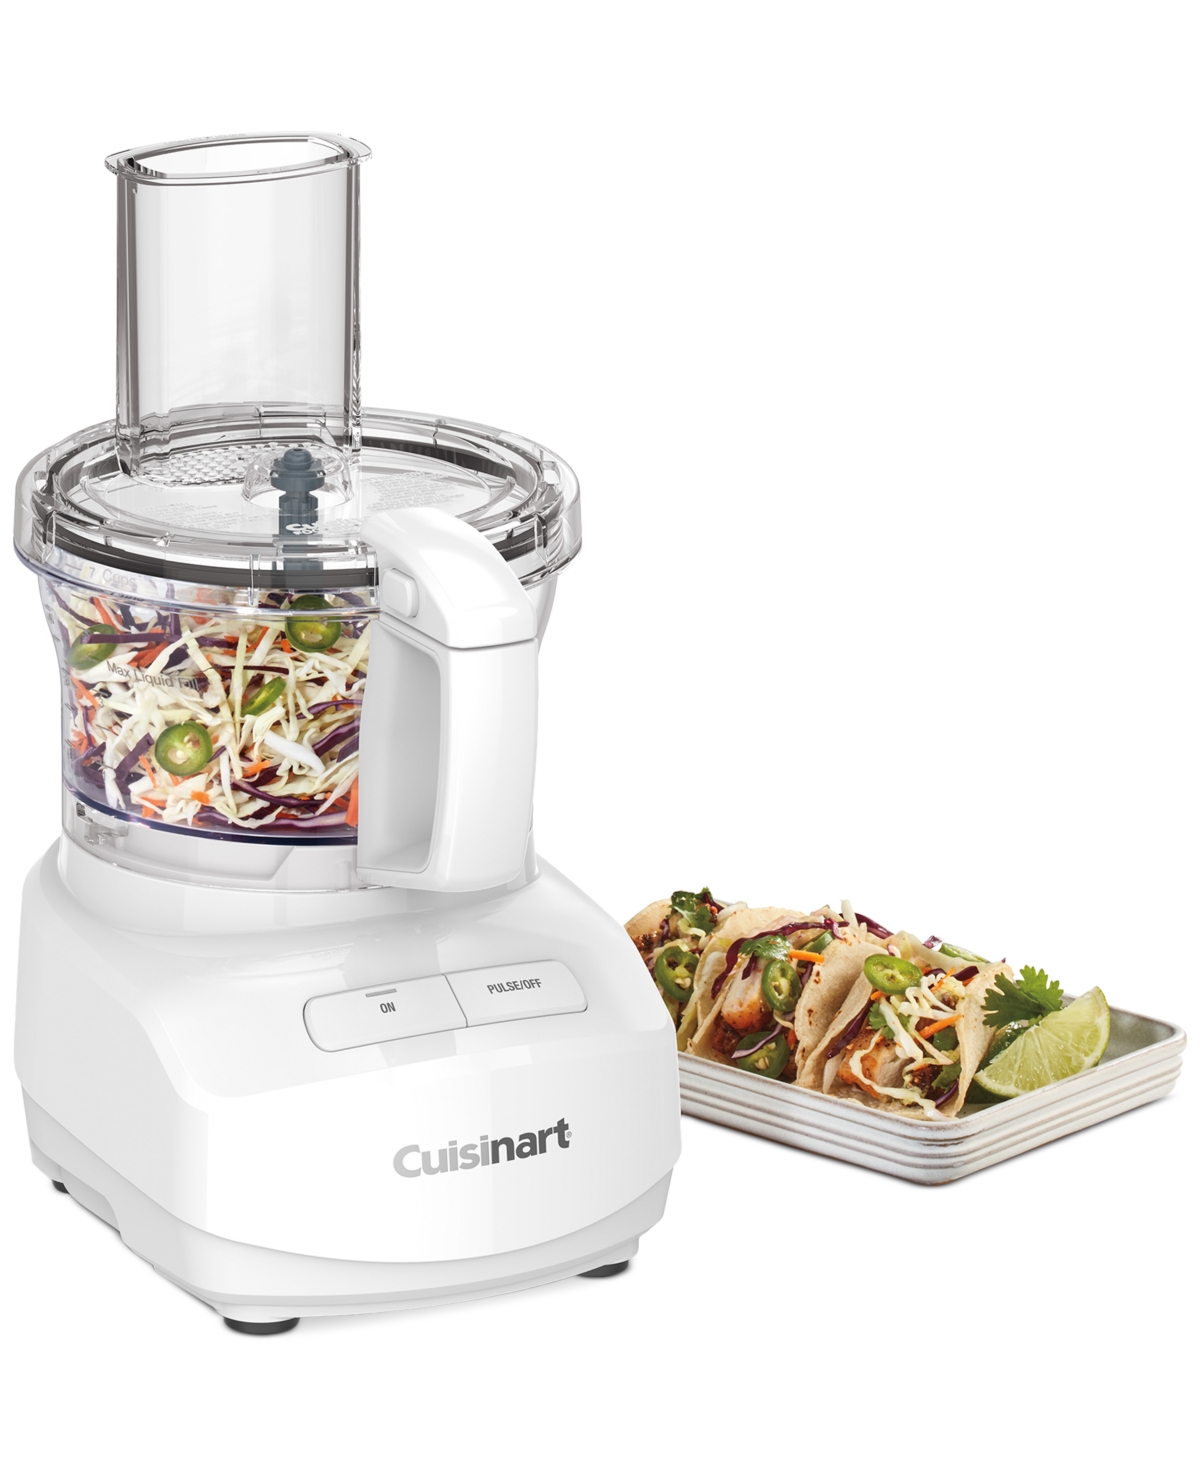 Cuisinart 7-cup Food Processor In White